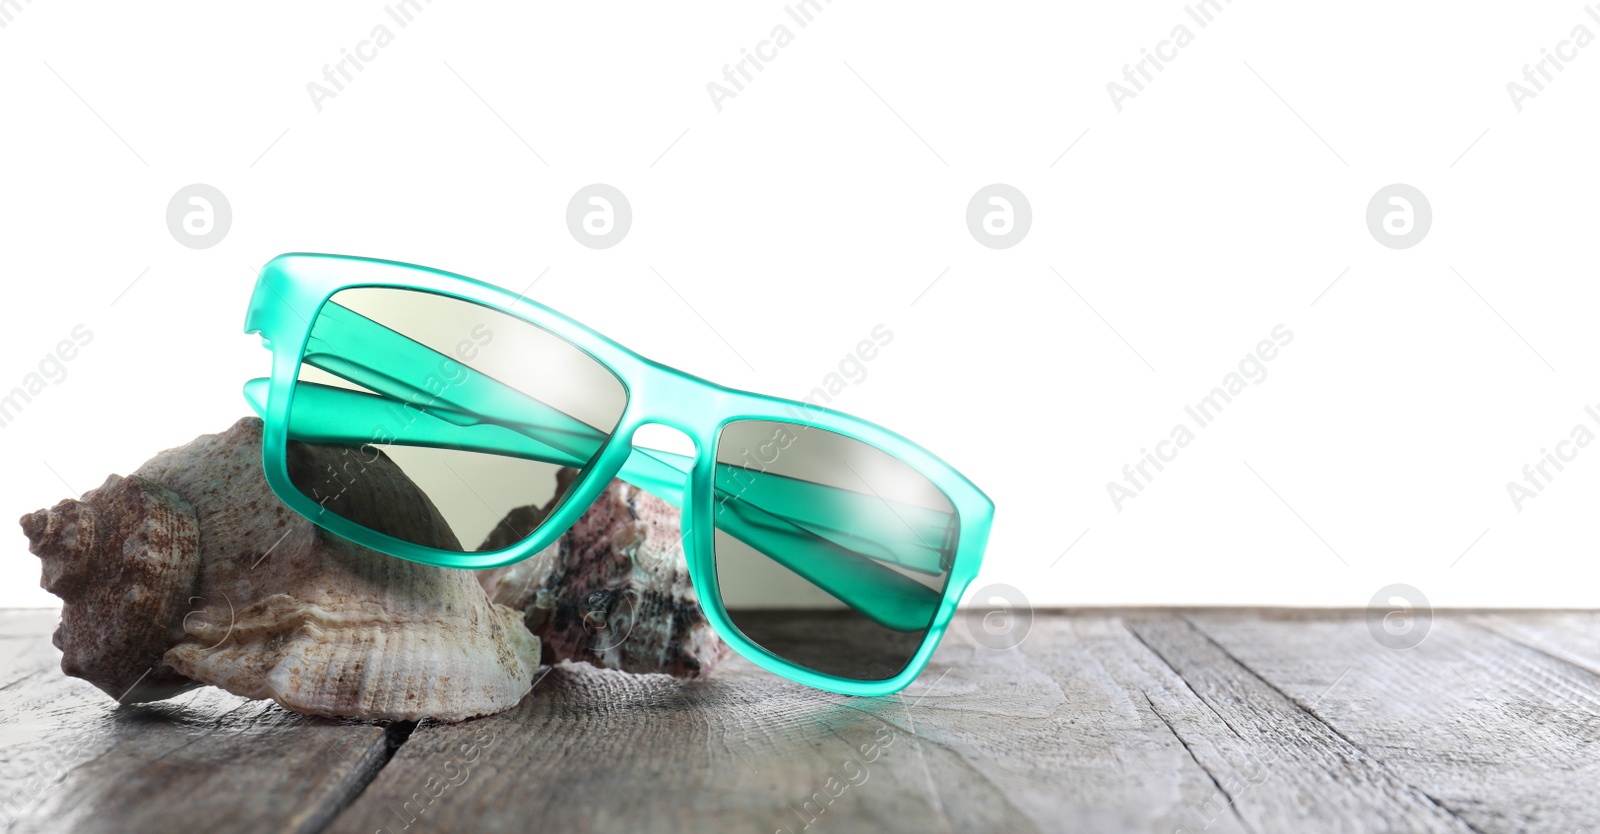 Photo of Stylish sunglasses and shells on wooden table against white background. Space for text